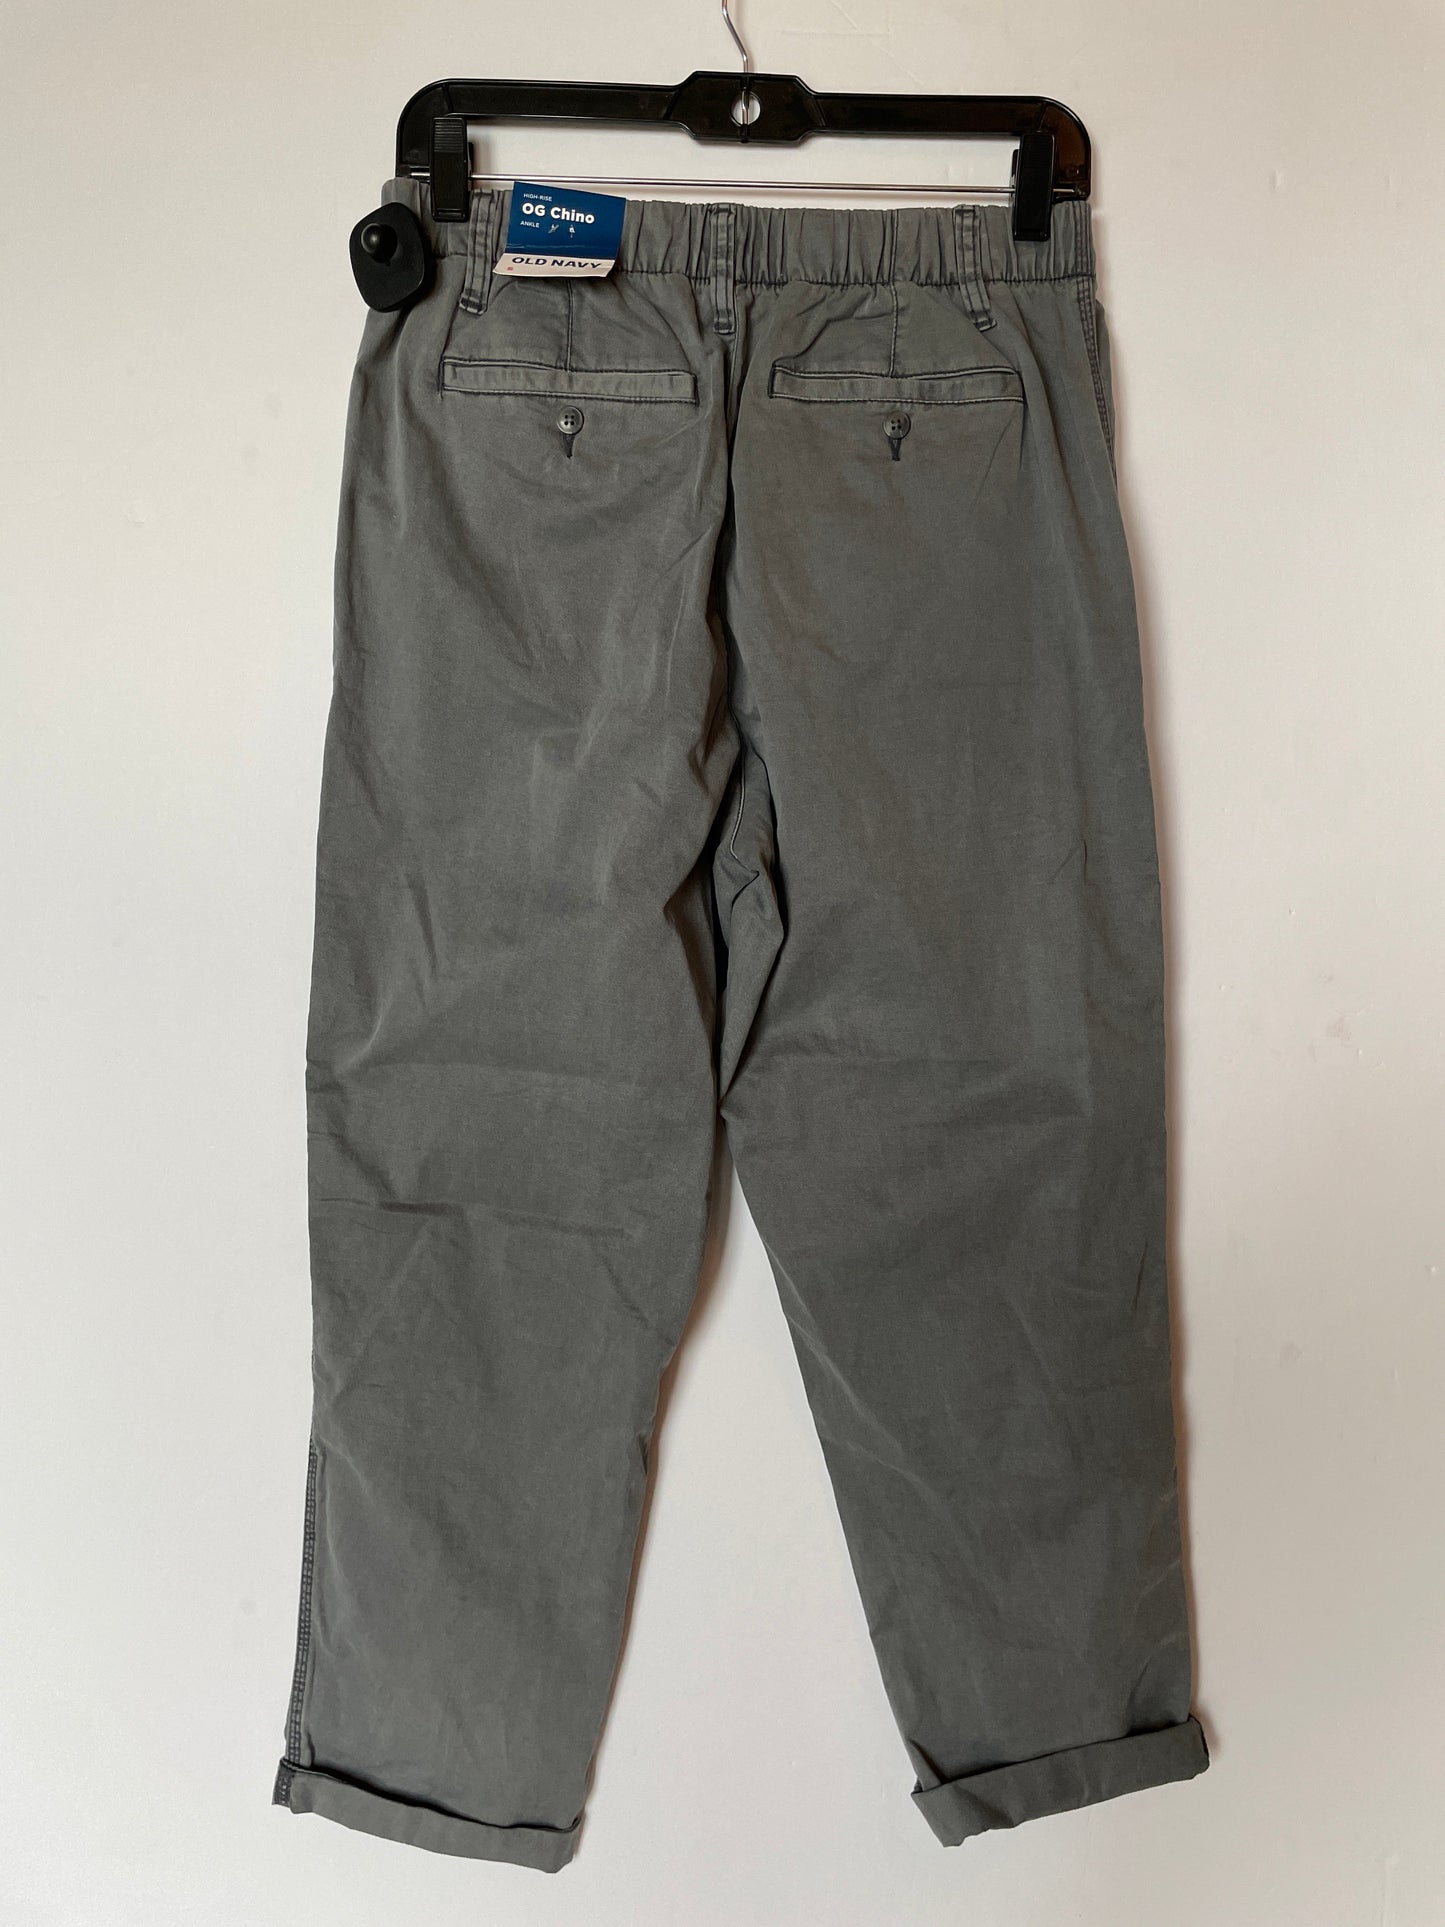 Grey Pants Cropped Old Navy, Size S